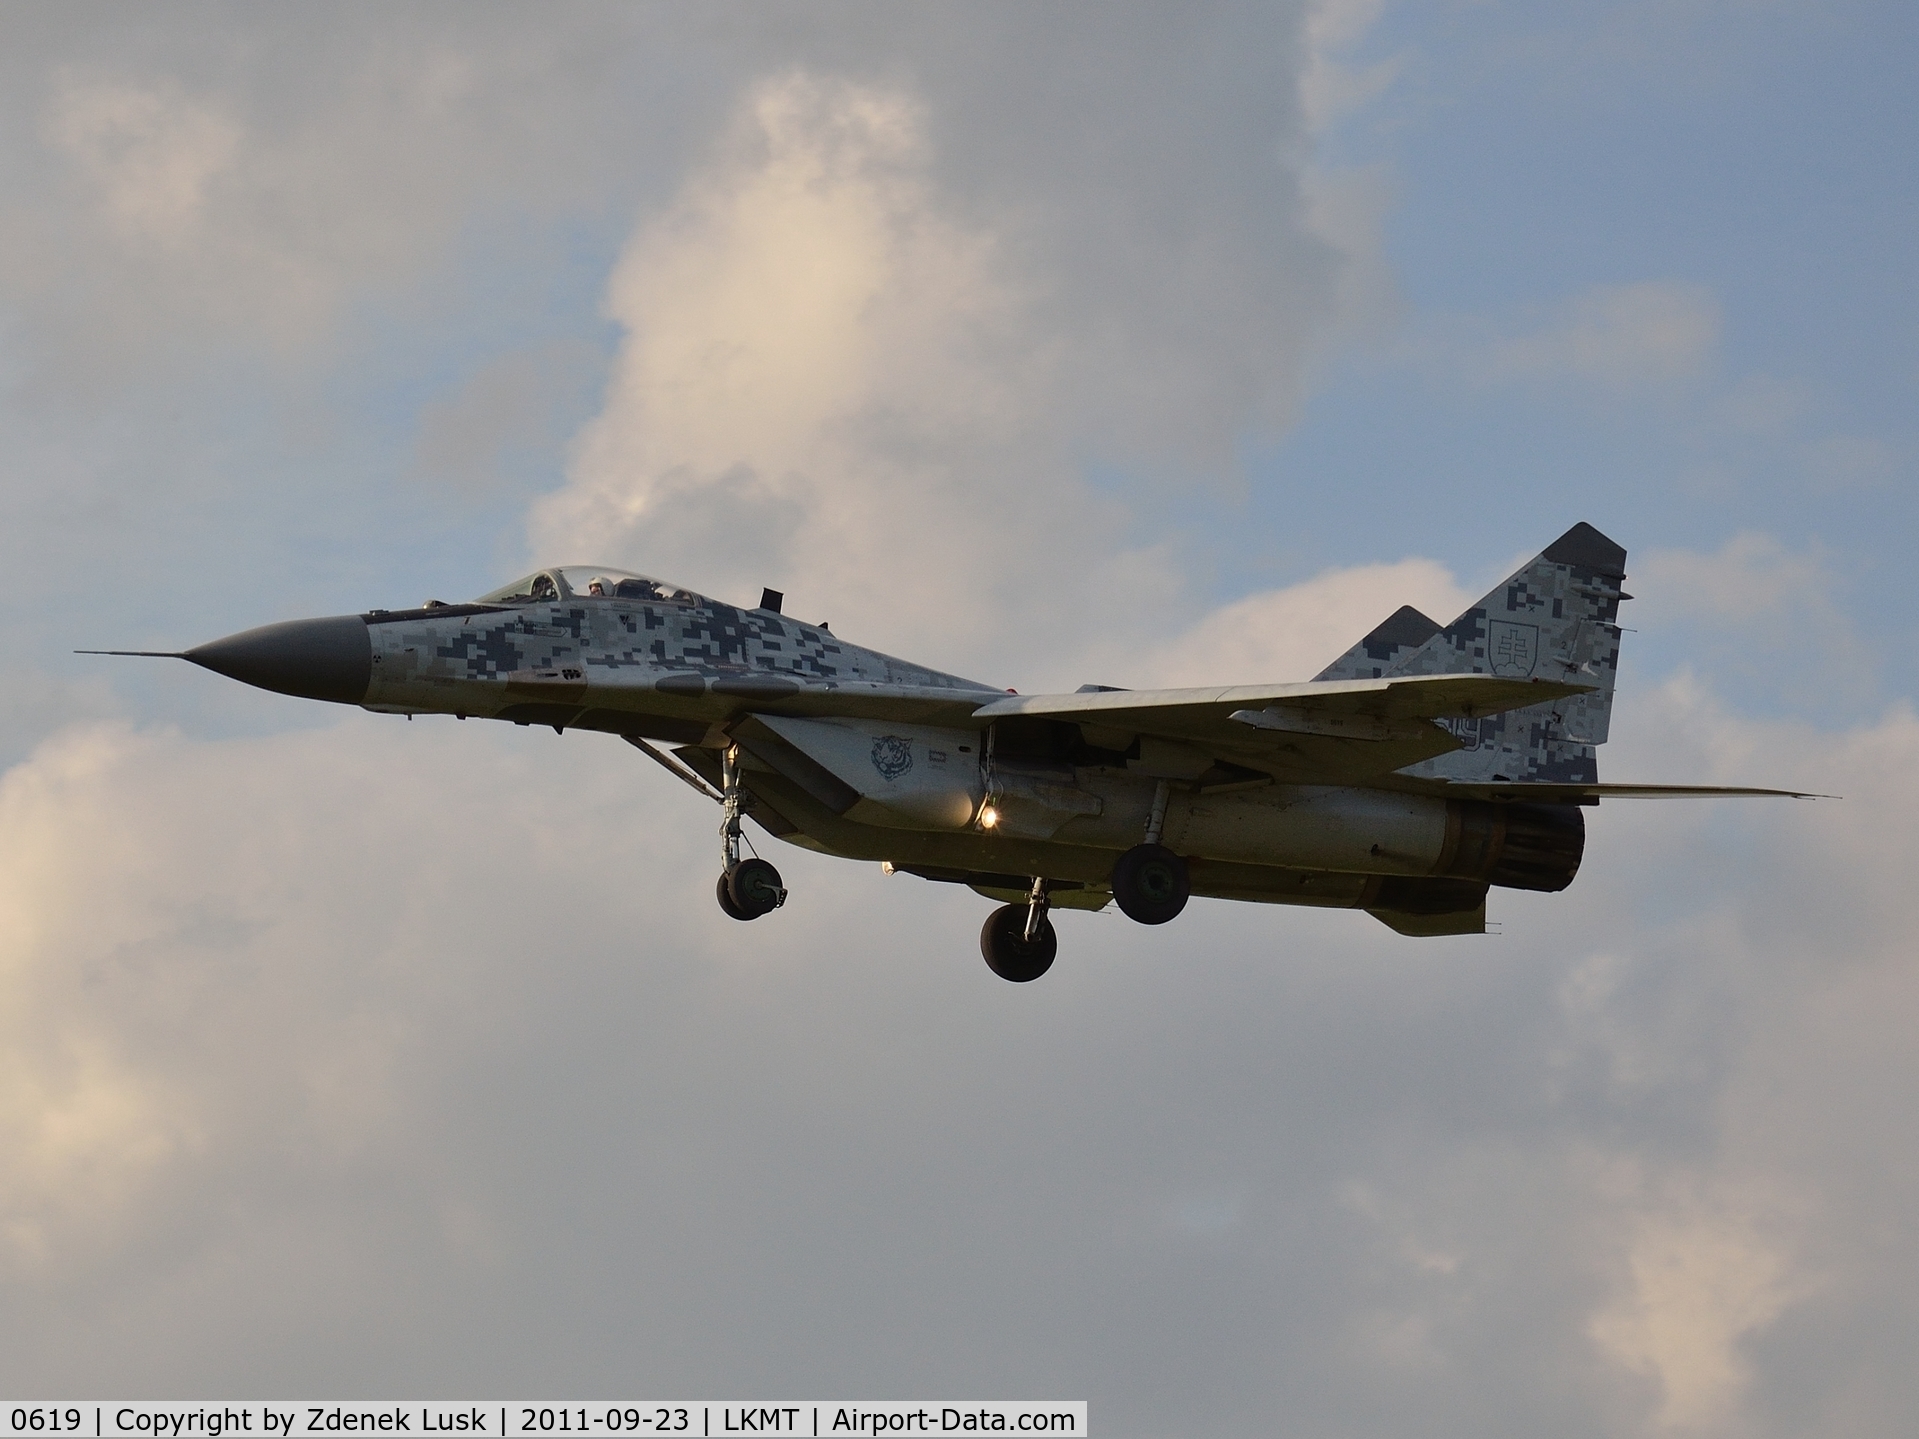 0619, Mikoyan-Gurevich MiG-29AS C/N 2960535406/4713, Arrival to Days of NATO 2011 event.